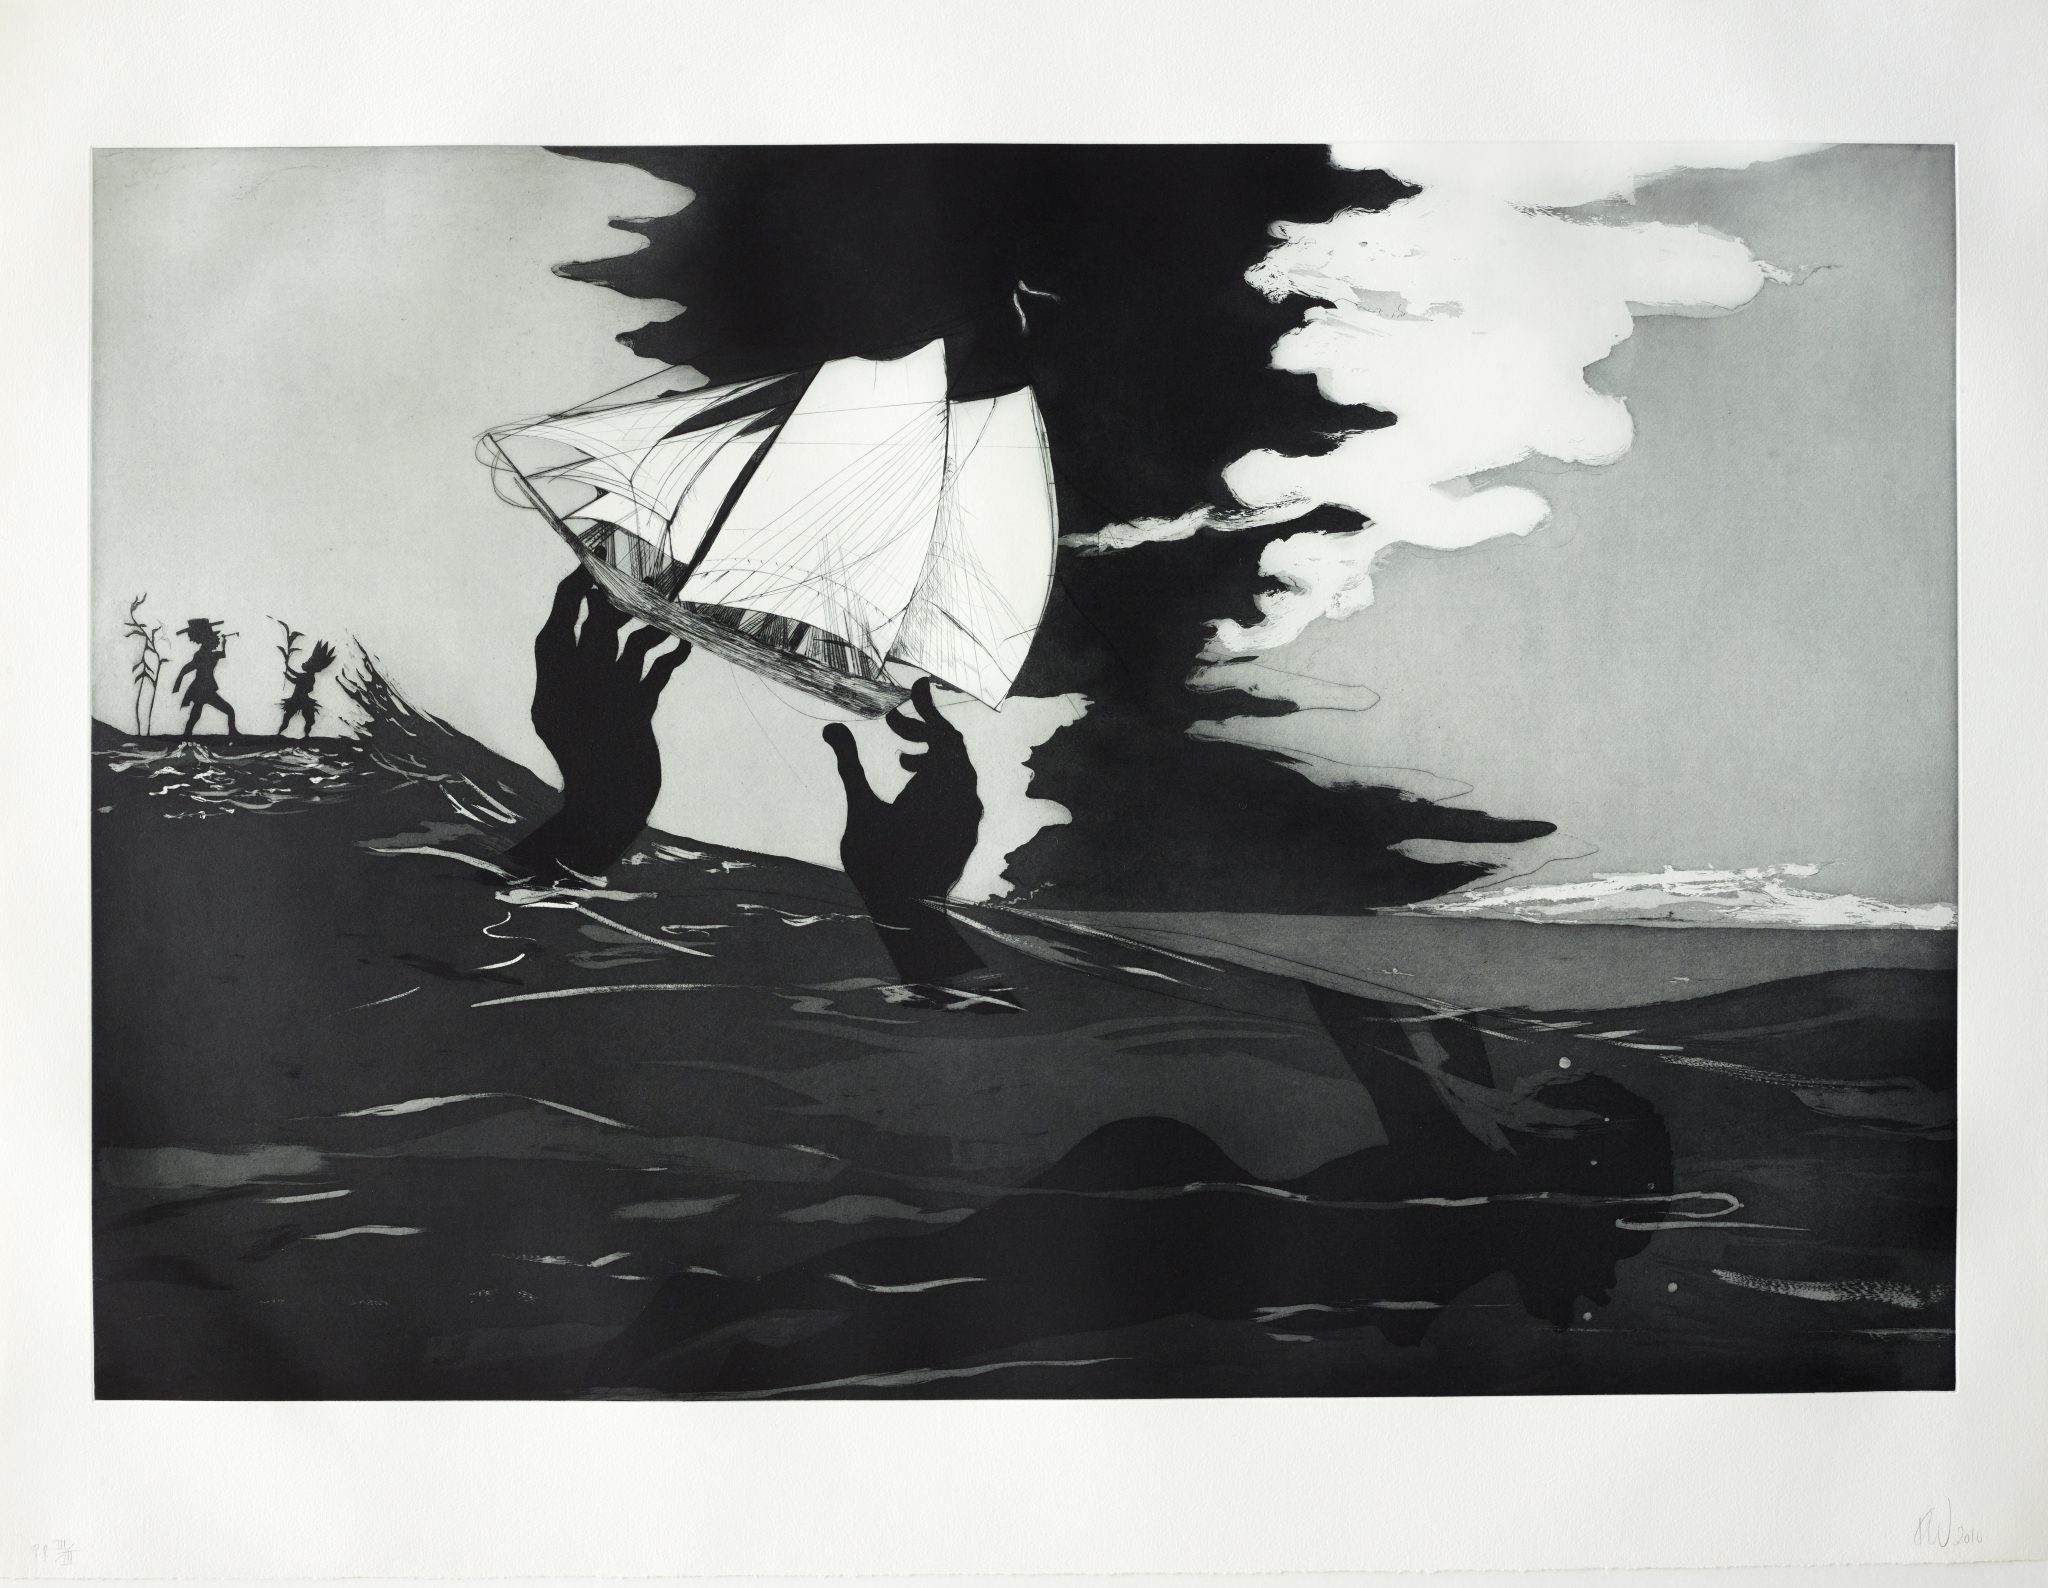 no world from An Unopened Land in Uncharted Waters by Kara Walker (2010), New York, Museum of Modern Art (MoMA) aquatint etching, 60.6 x 90.5cm; image © British Museum